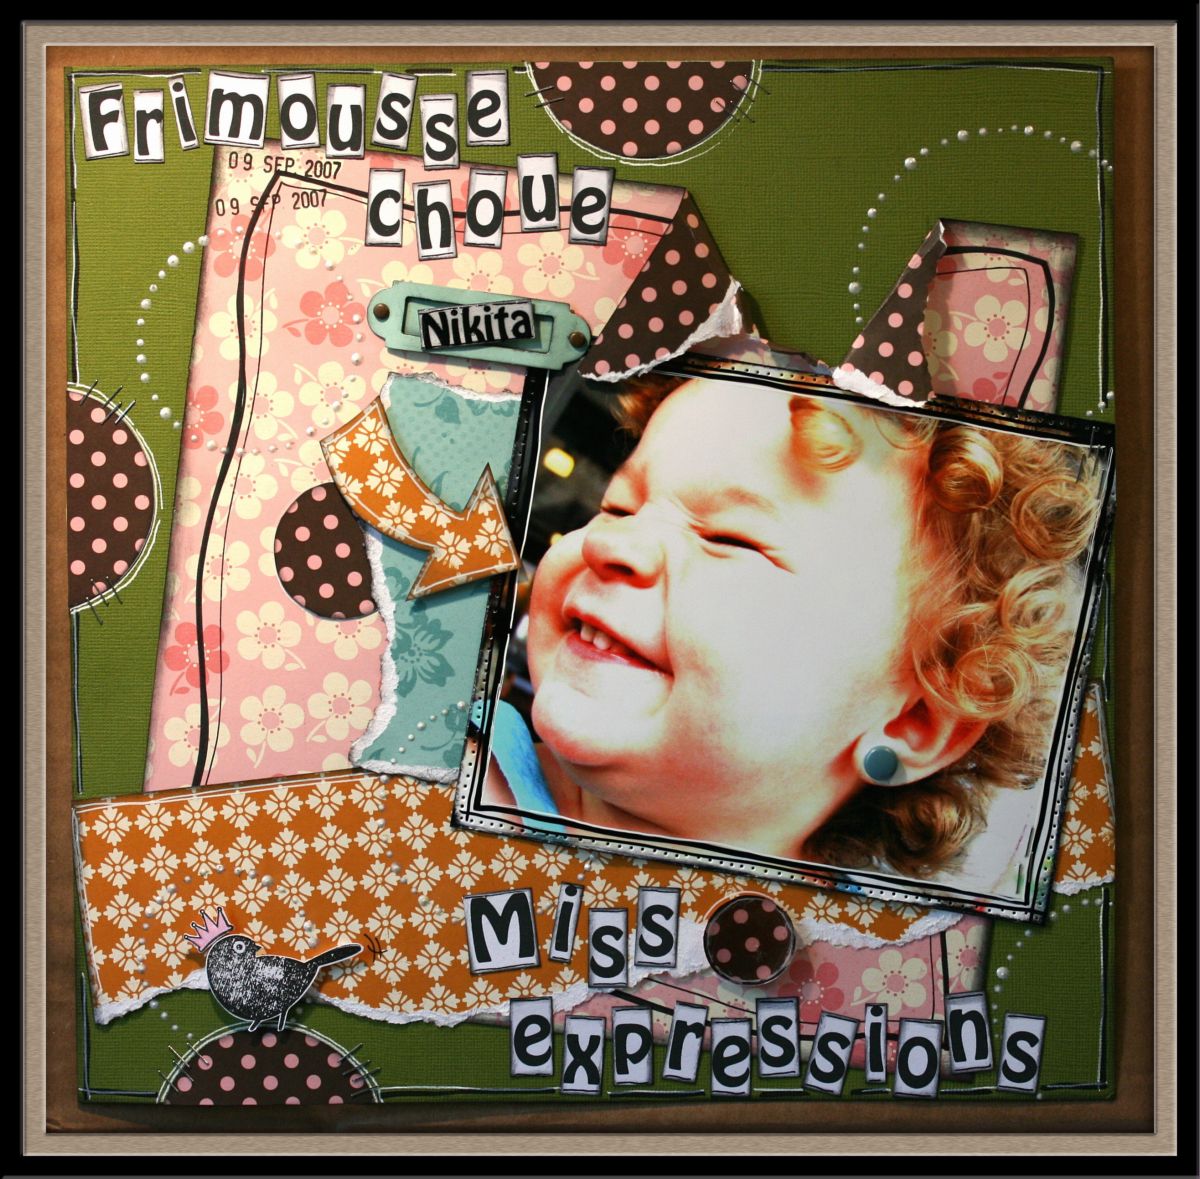 [frimousse+choue,+miss+expressions.jpg]